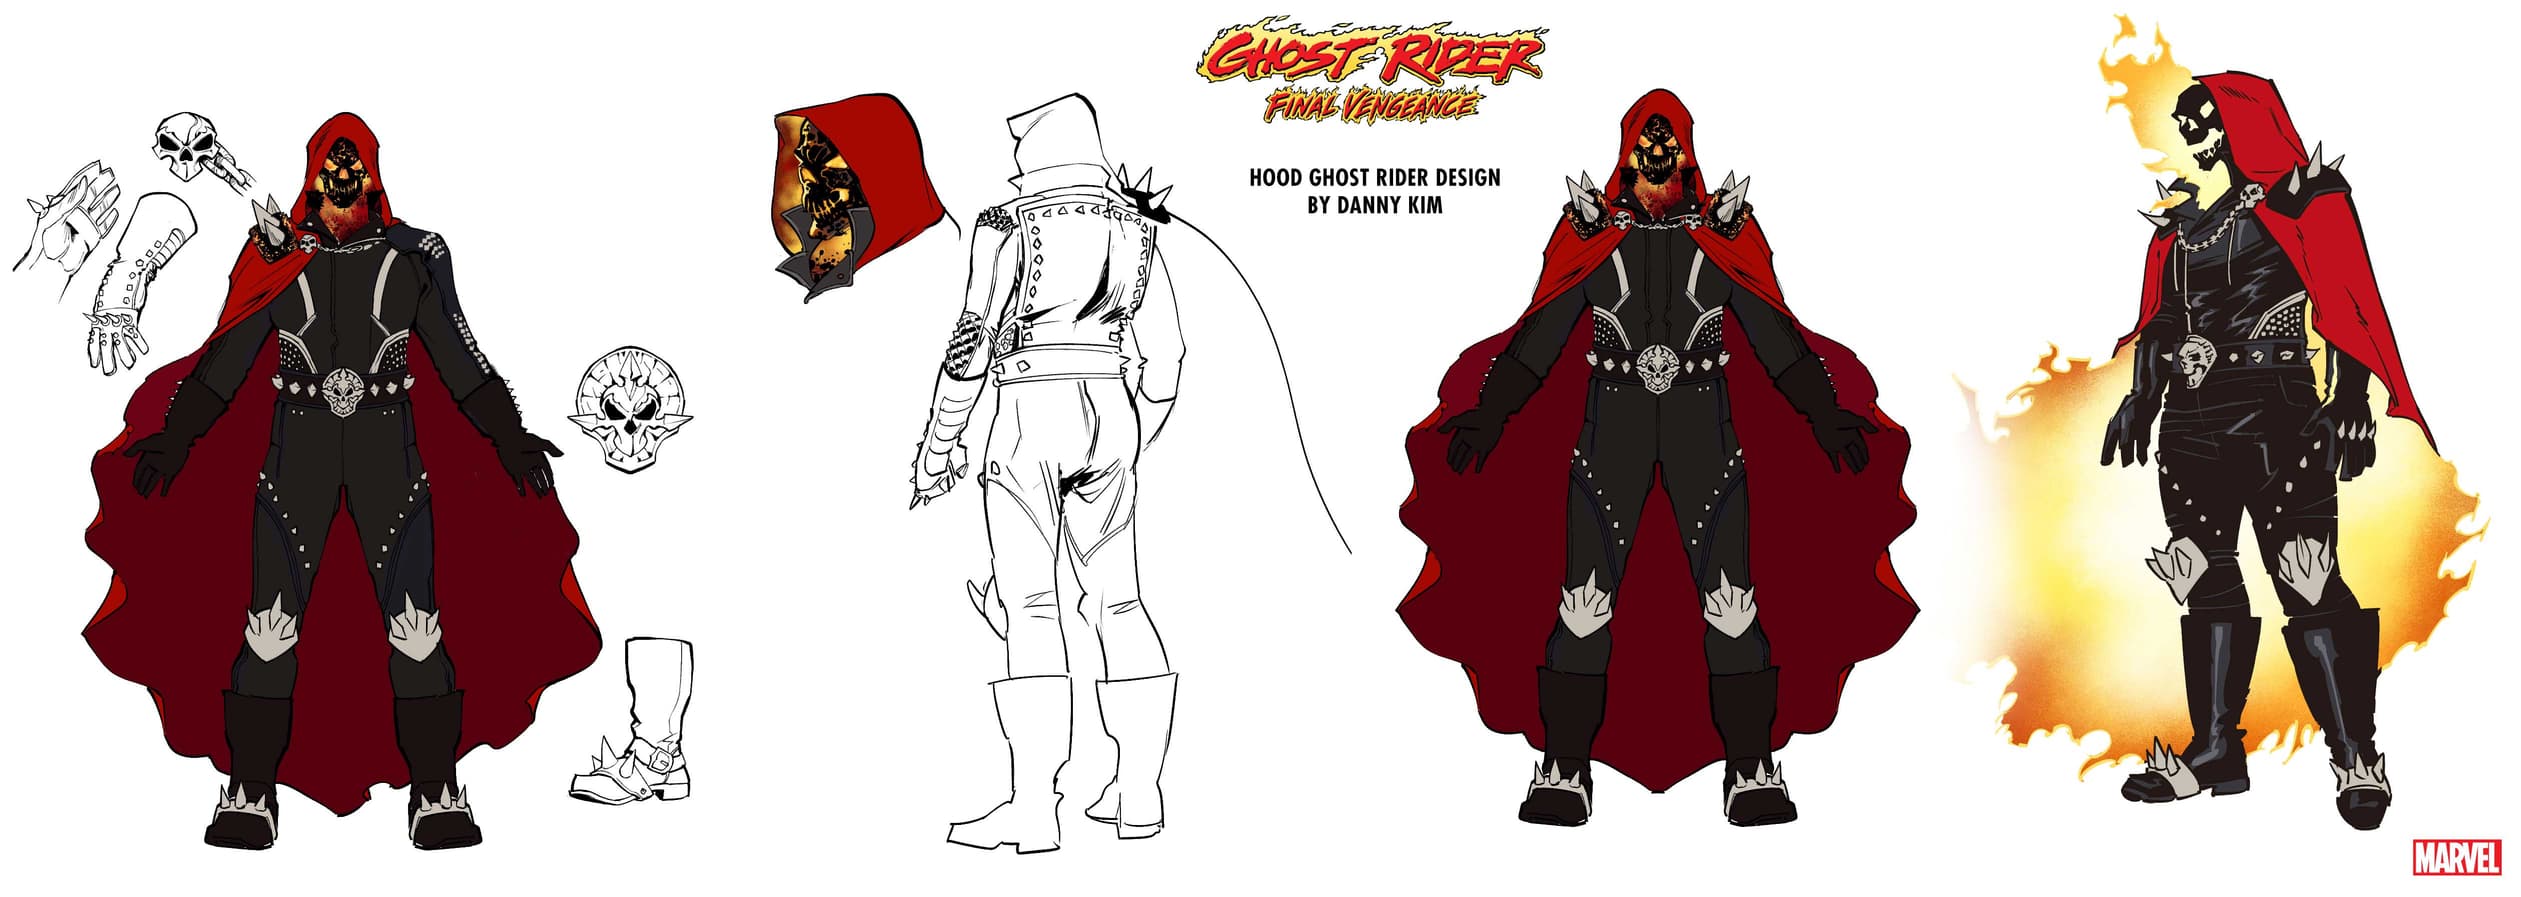 GHOST RIDER: FINAL VENGEANCE: Hood Ghost Rider character design sheet by Danny Kim